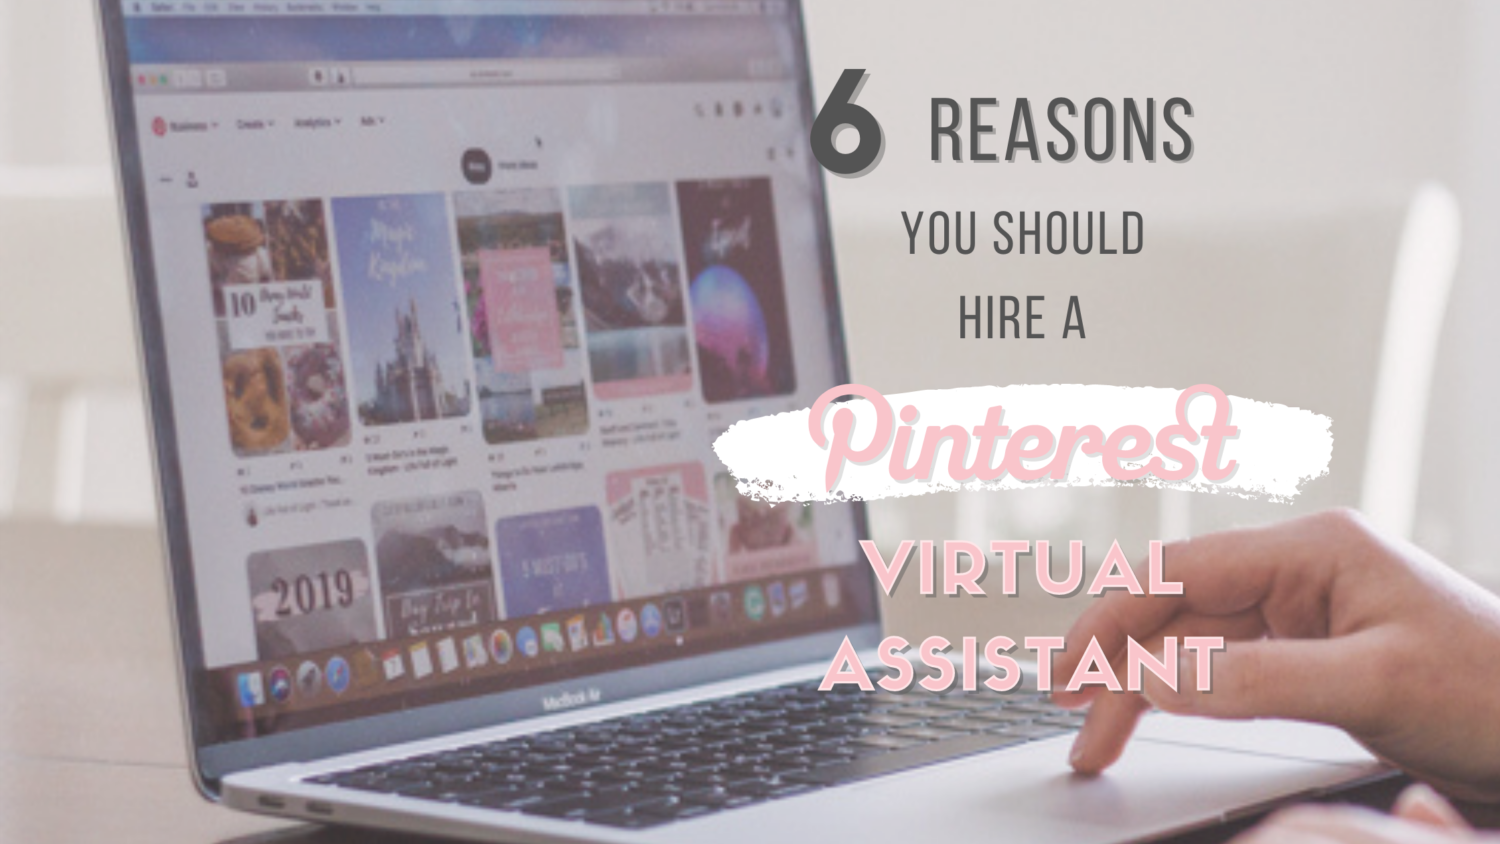 6 Reasons Why You Should Hire a Pinterest Virtual Assistant